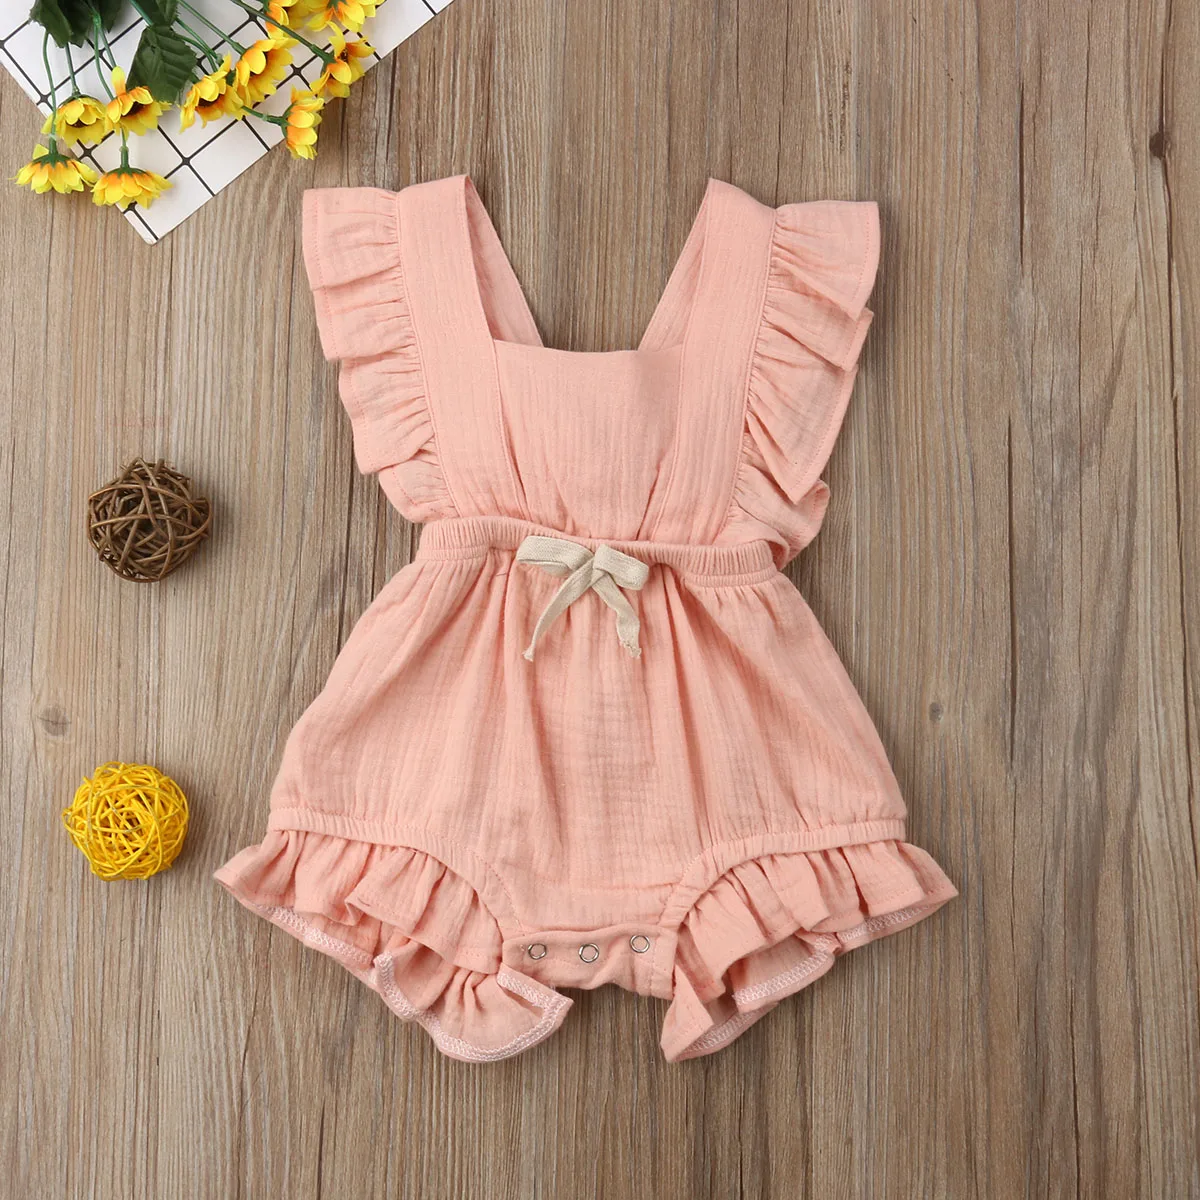 New Arrivels Baby Girls Ruffle One-Pieces Clothes Summer Newborn Kids Sleeveless Romper Jumpsuit Outfits Sunsuit